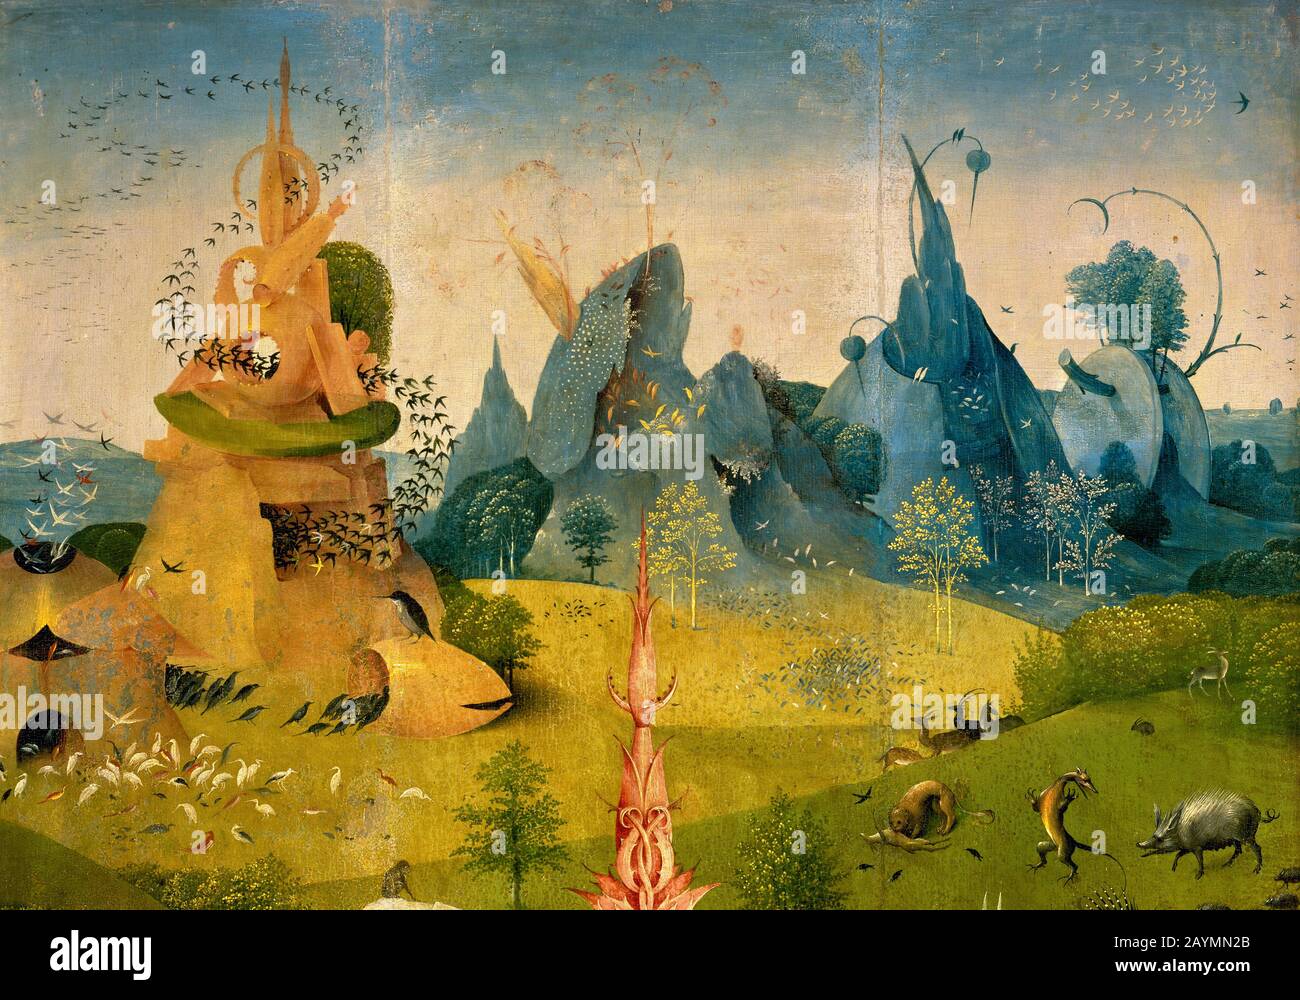 The Garden of Earthly Delights.Triptych. Paradise panel, c. 1490-1500. The Creation, detail. Attributed to Hieronymus Bosch (1450-1516). Oil on panel, 188 x 77 cm. Early Netherlandish Renaissance. Prado Museum. Madrid, Spain. Stock Photo